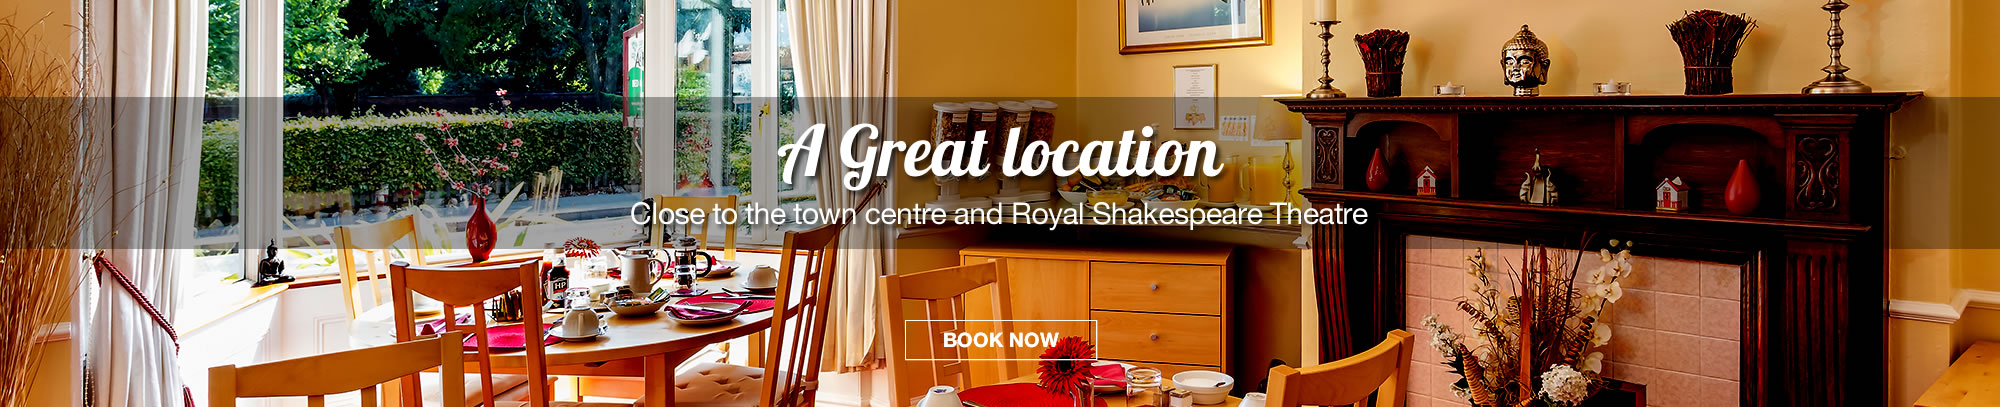 Ashgrove House - A Great location close to the town centre and Royal Shakespeare Theatre